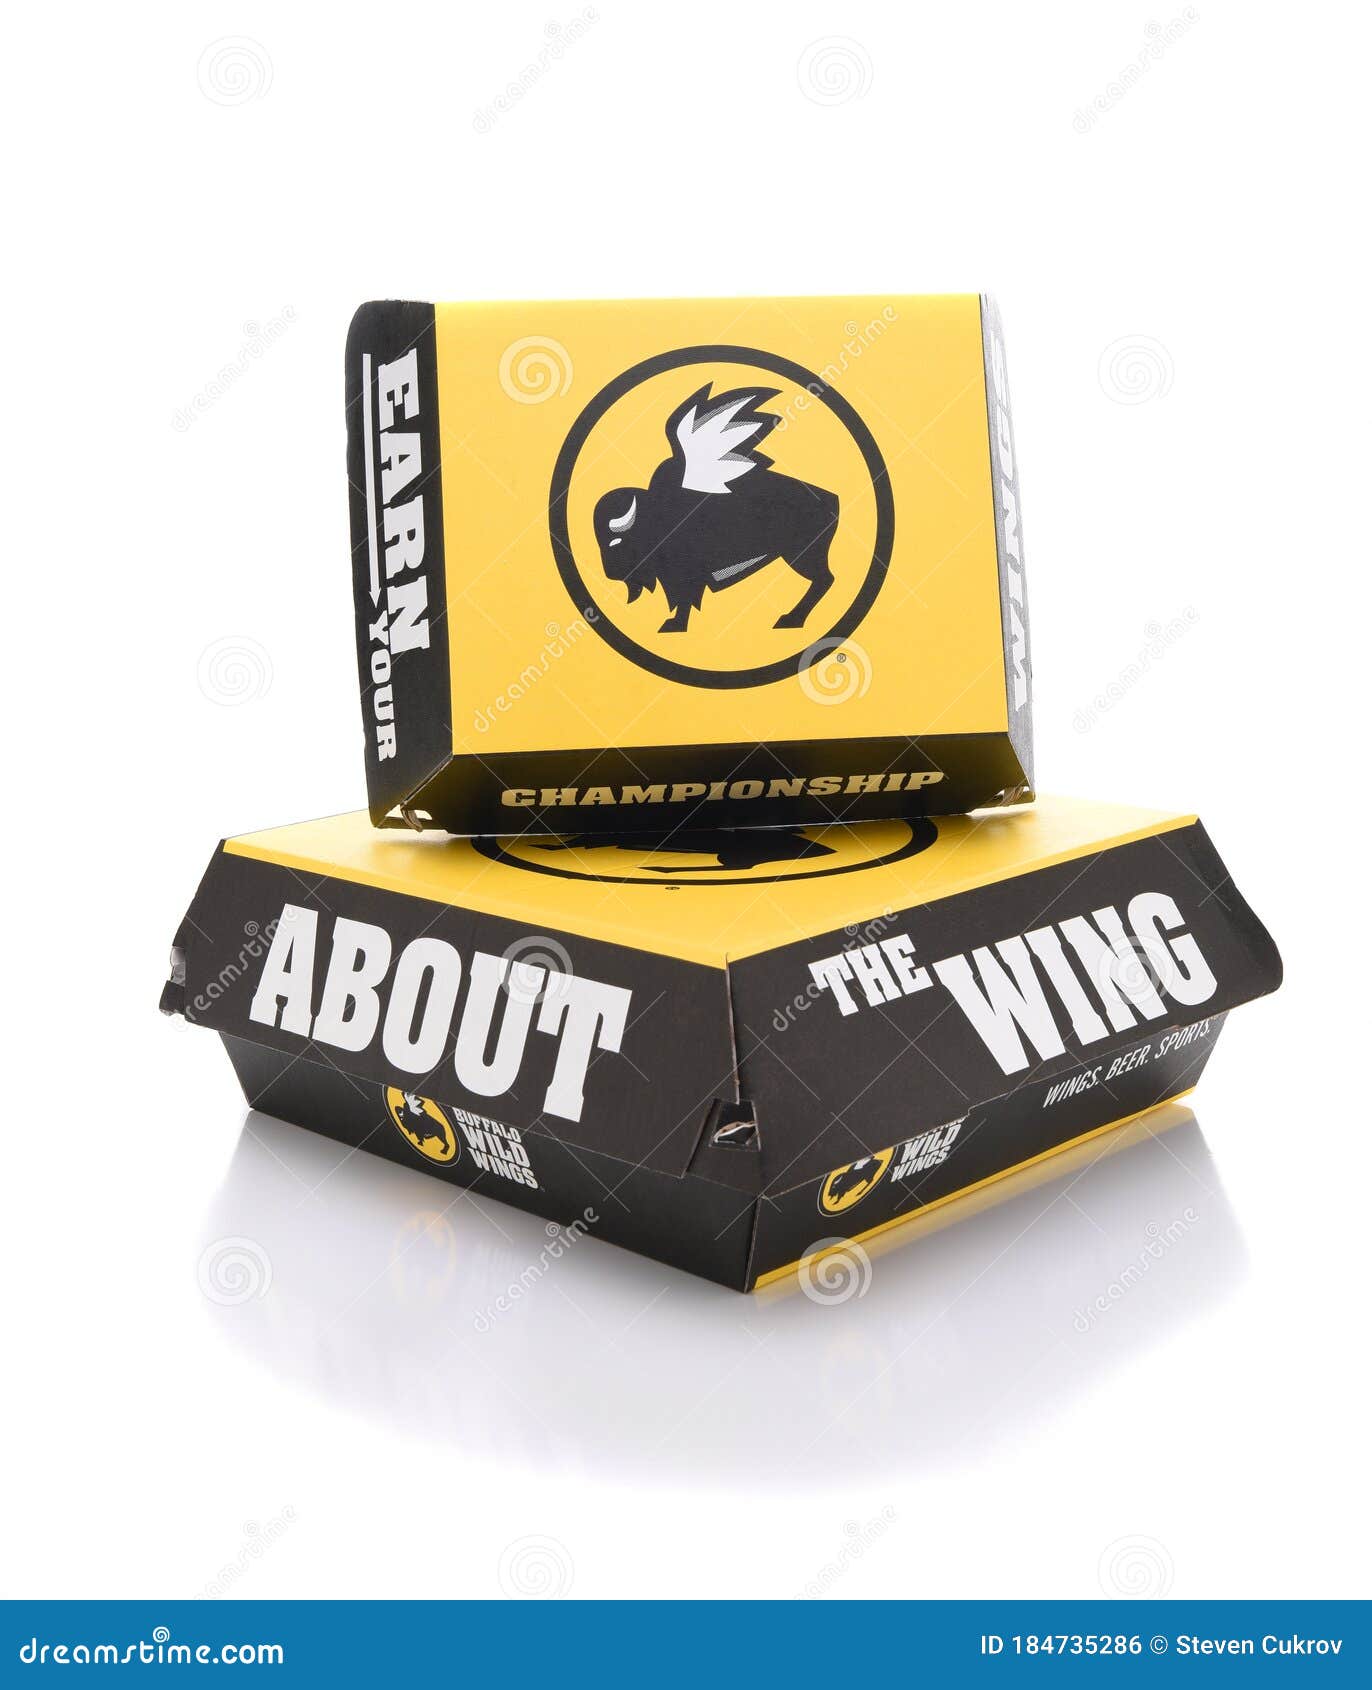 Buffalo Wild Wings Take-Out Boxes Editorial Photo - Image of sauce